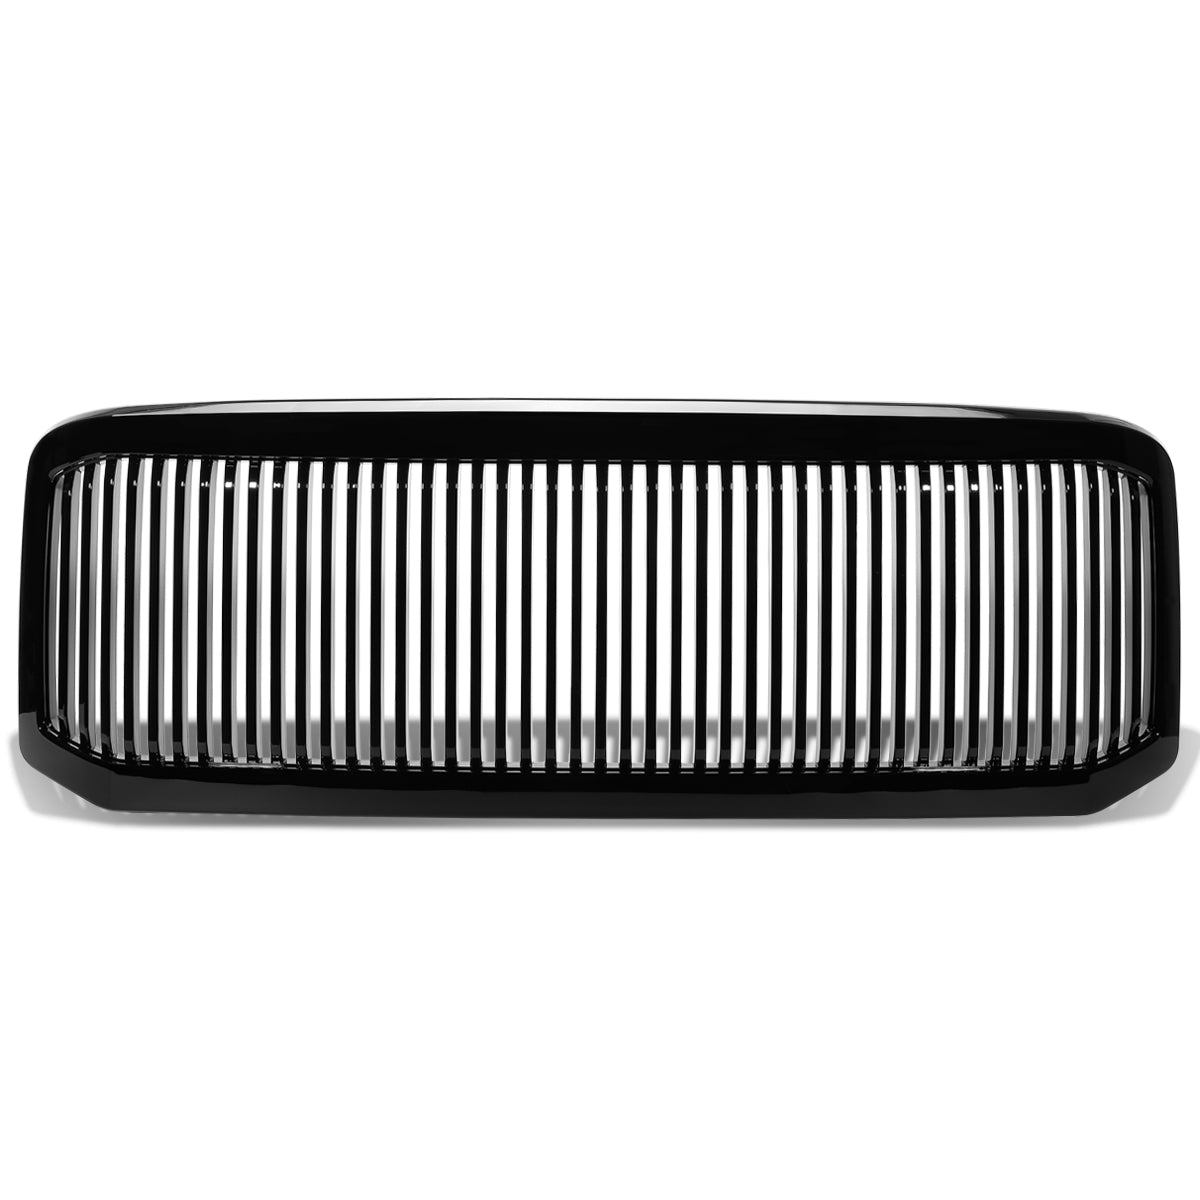 05-07 Ford F250 F350 F450 F550 Super Duty Front Grille - Vertical Fence Style - Black